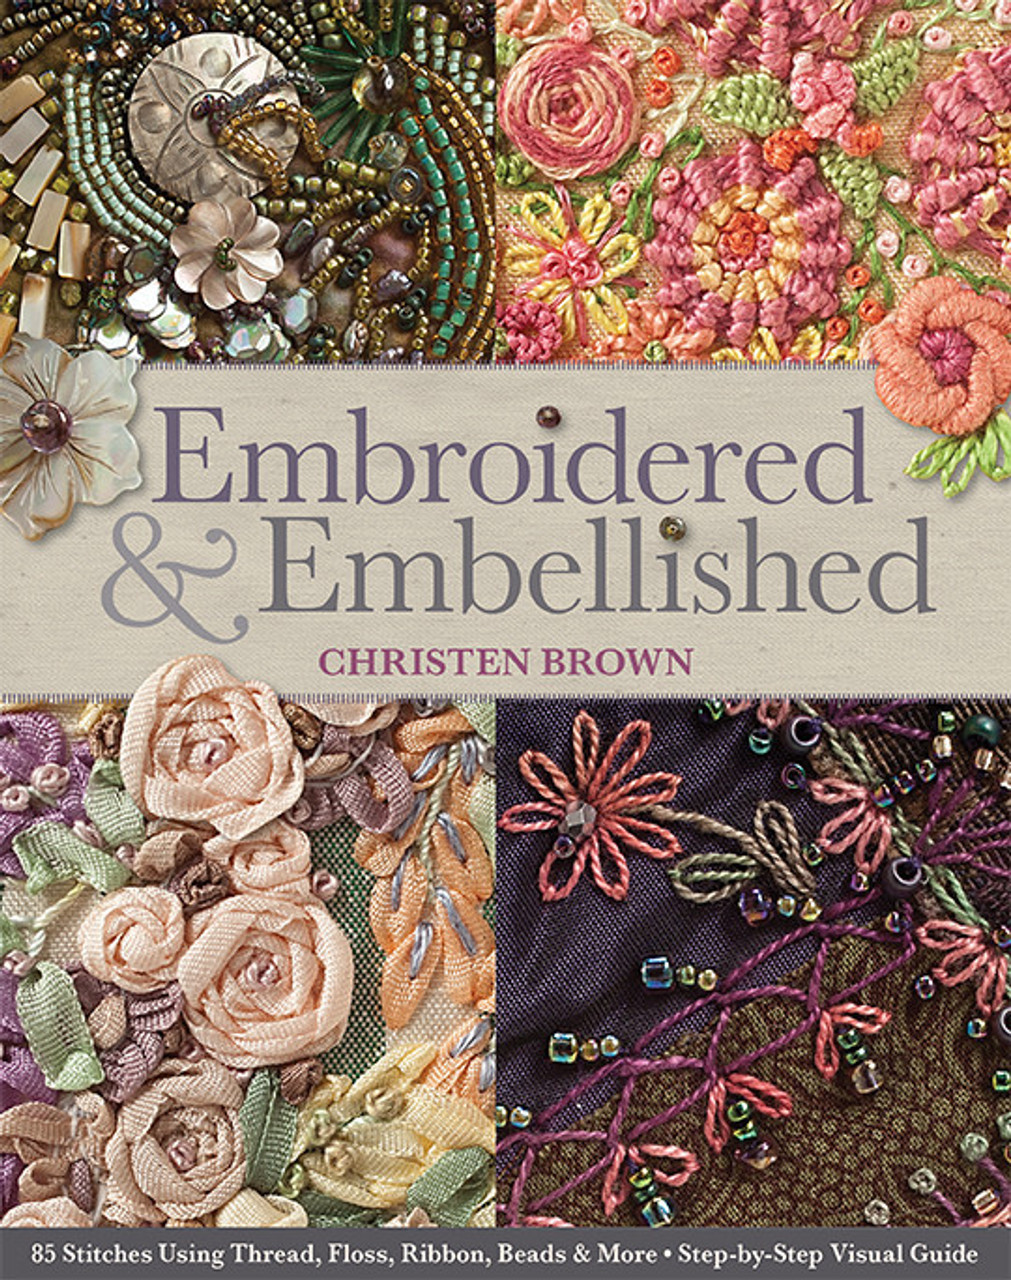 The Embroidery Story and The Lace Story: Minor toning, else